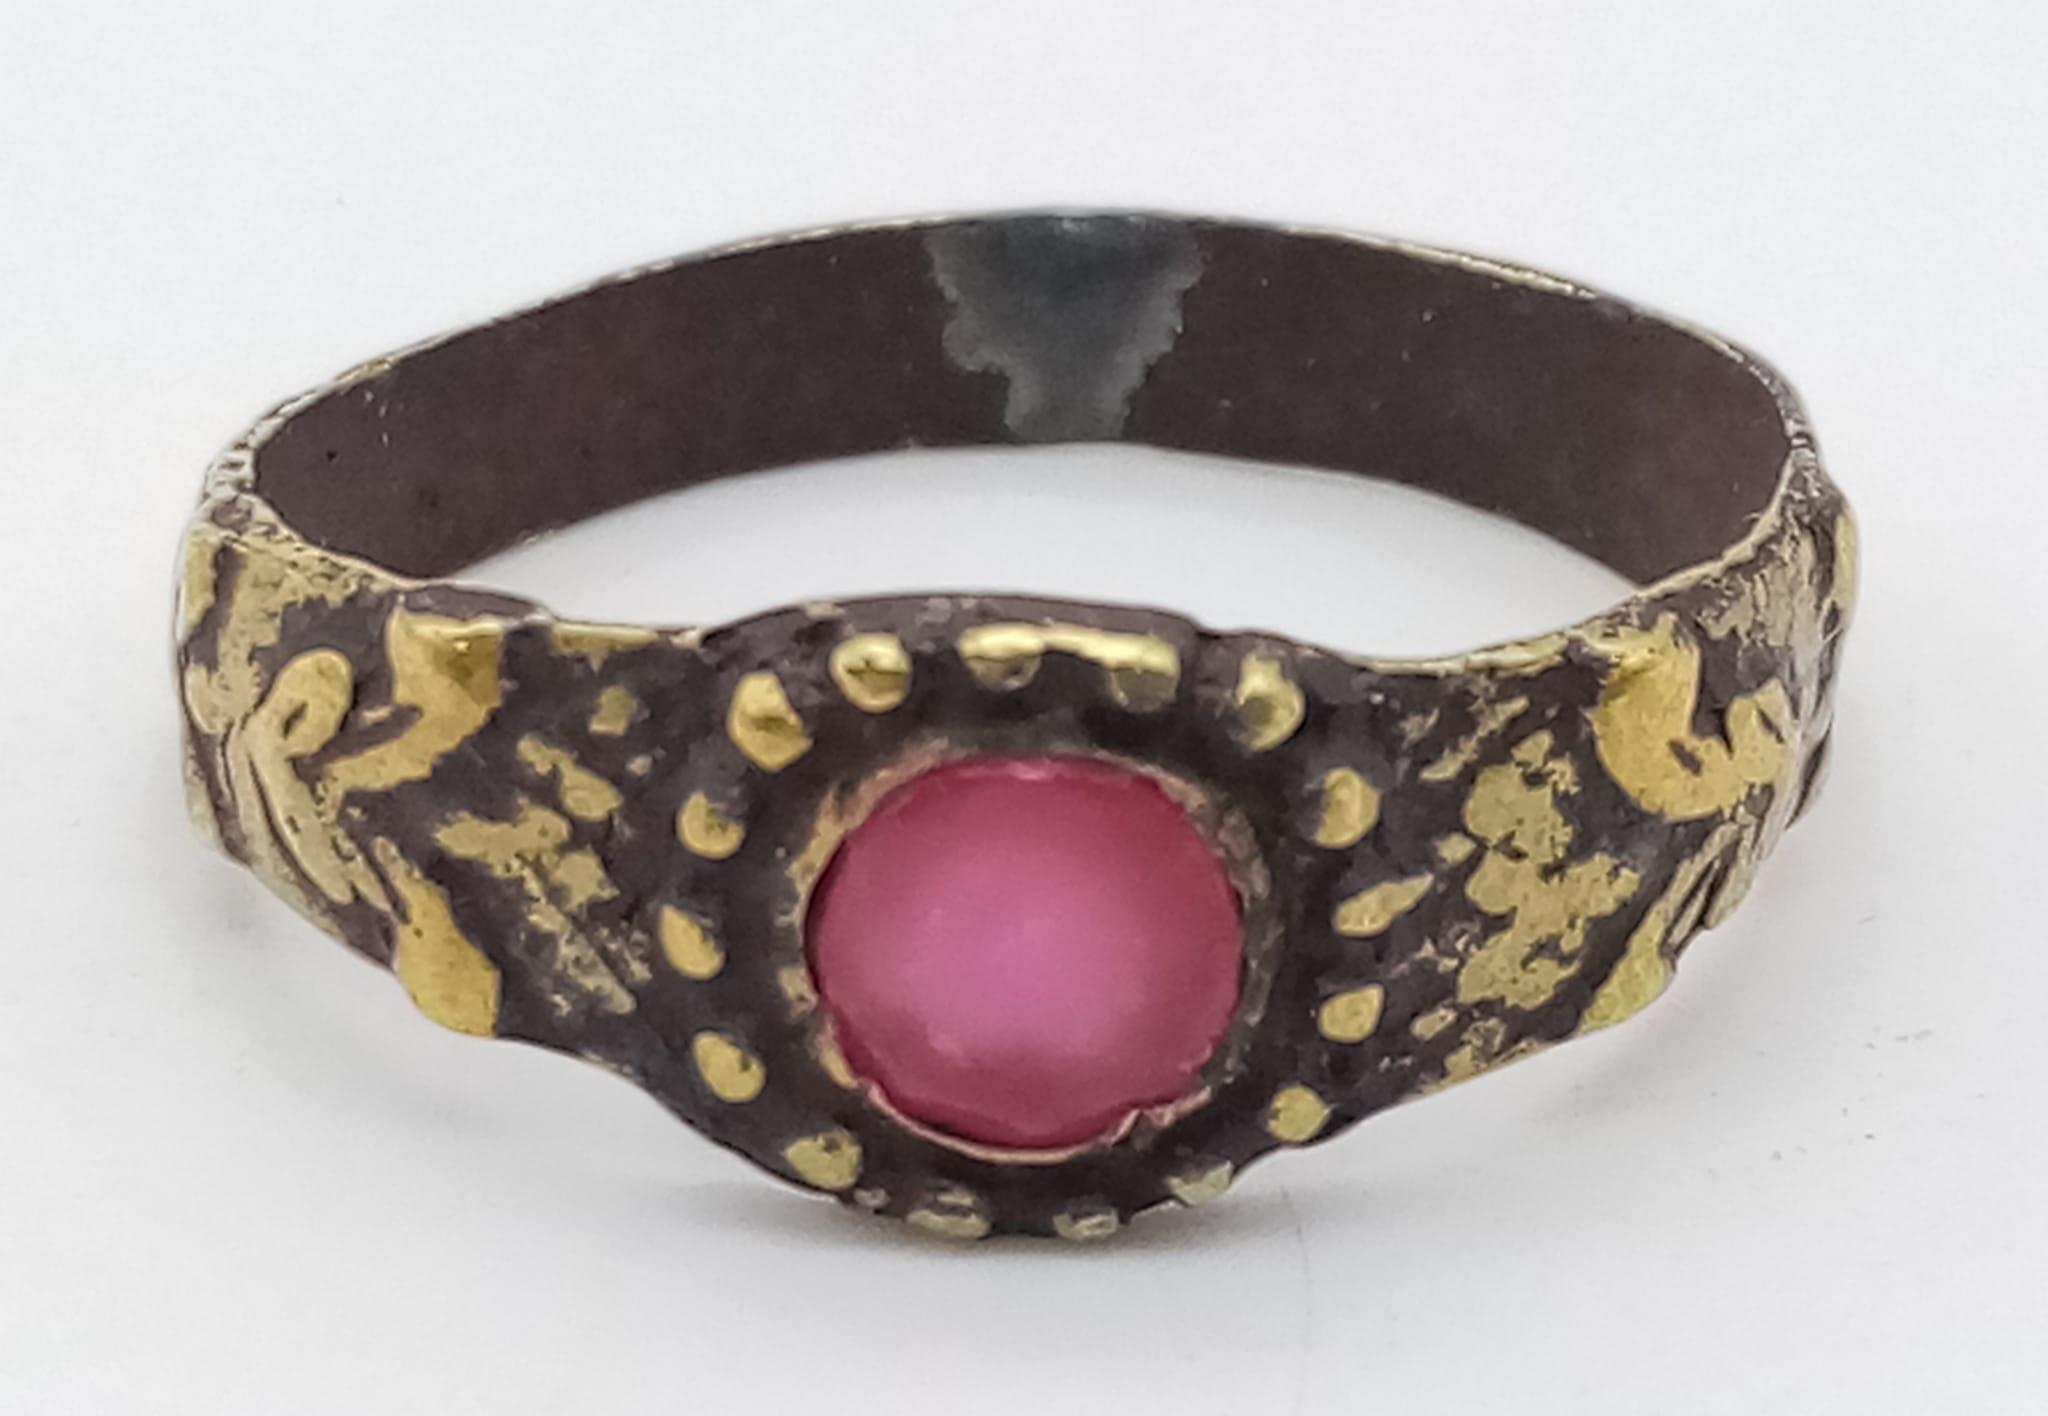 An Antique High-Grade Gold and Ruby Ring - Possibly 16th Century. Size V. 2.73g total weight. - Image 2 of 3